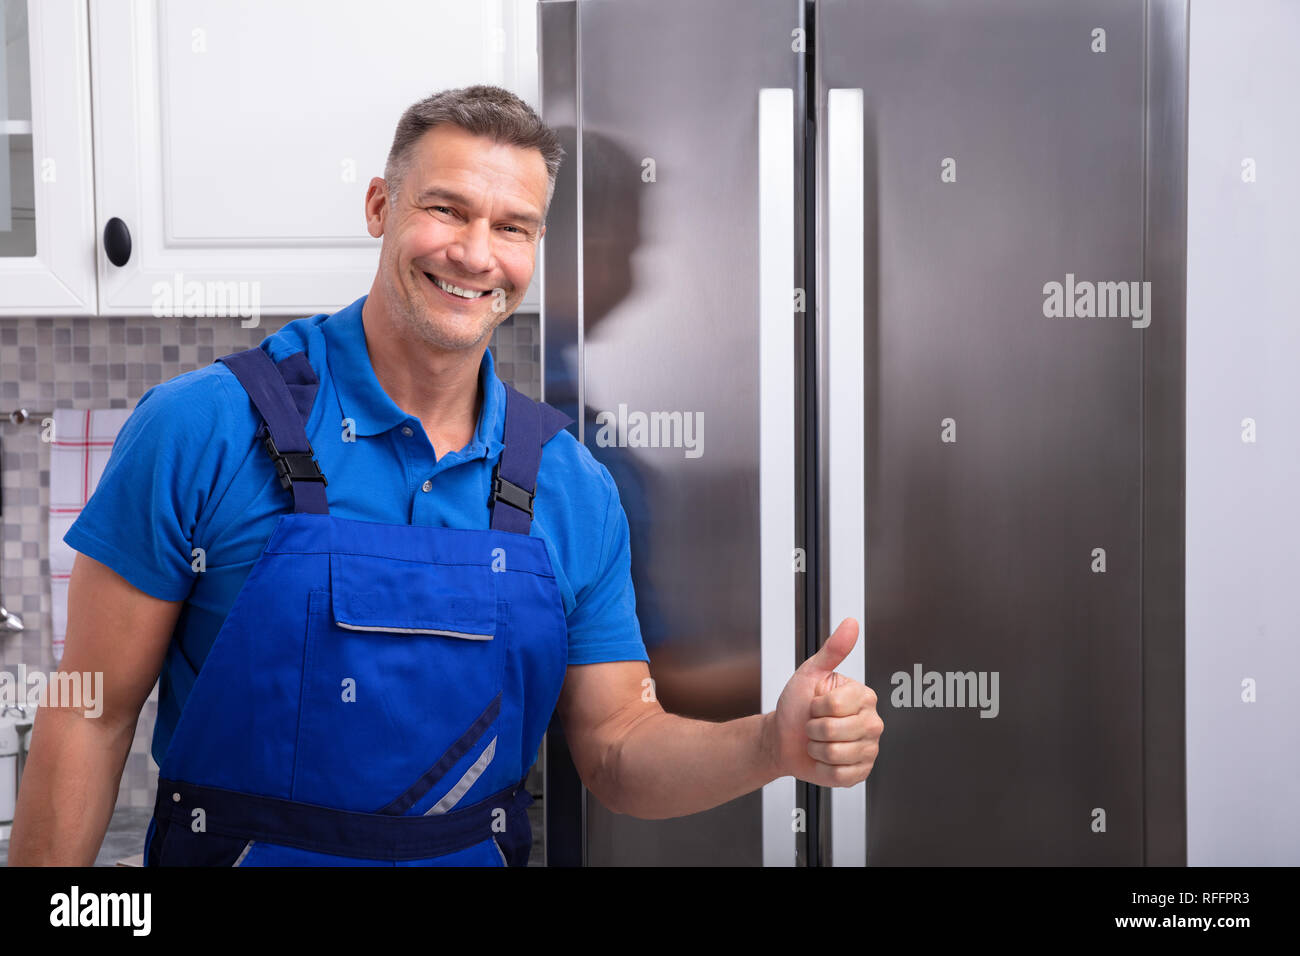 Happy Mature Male Technician Gesturing Thumbs Up Sign Stock Photo